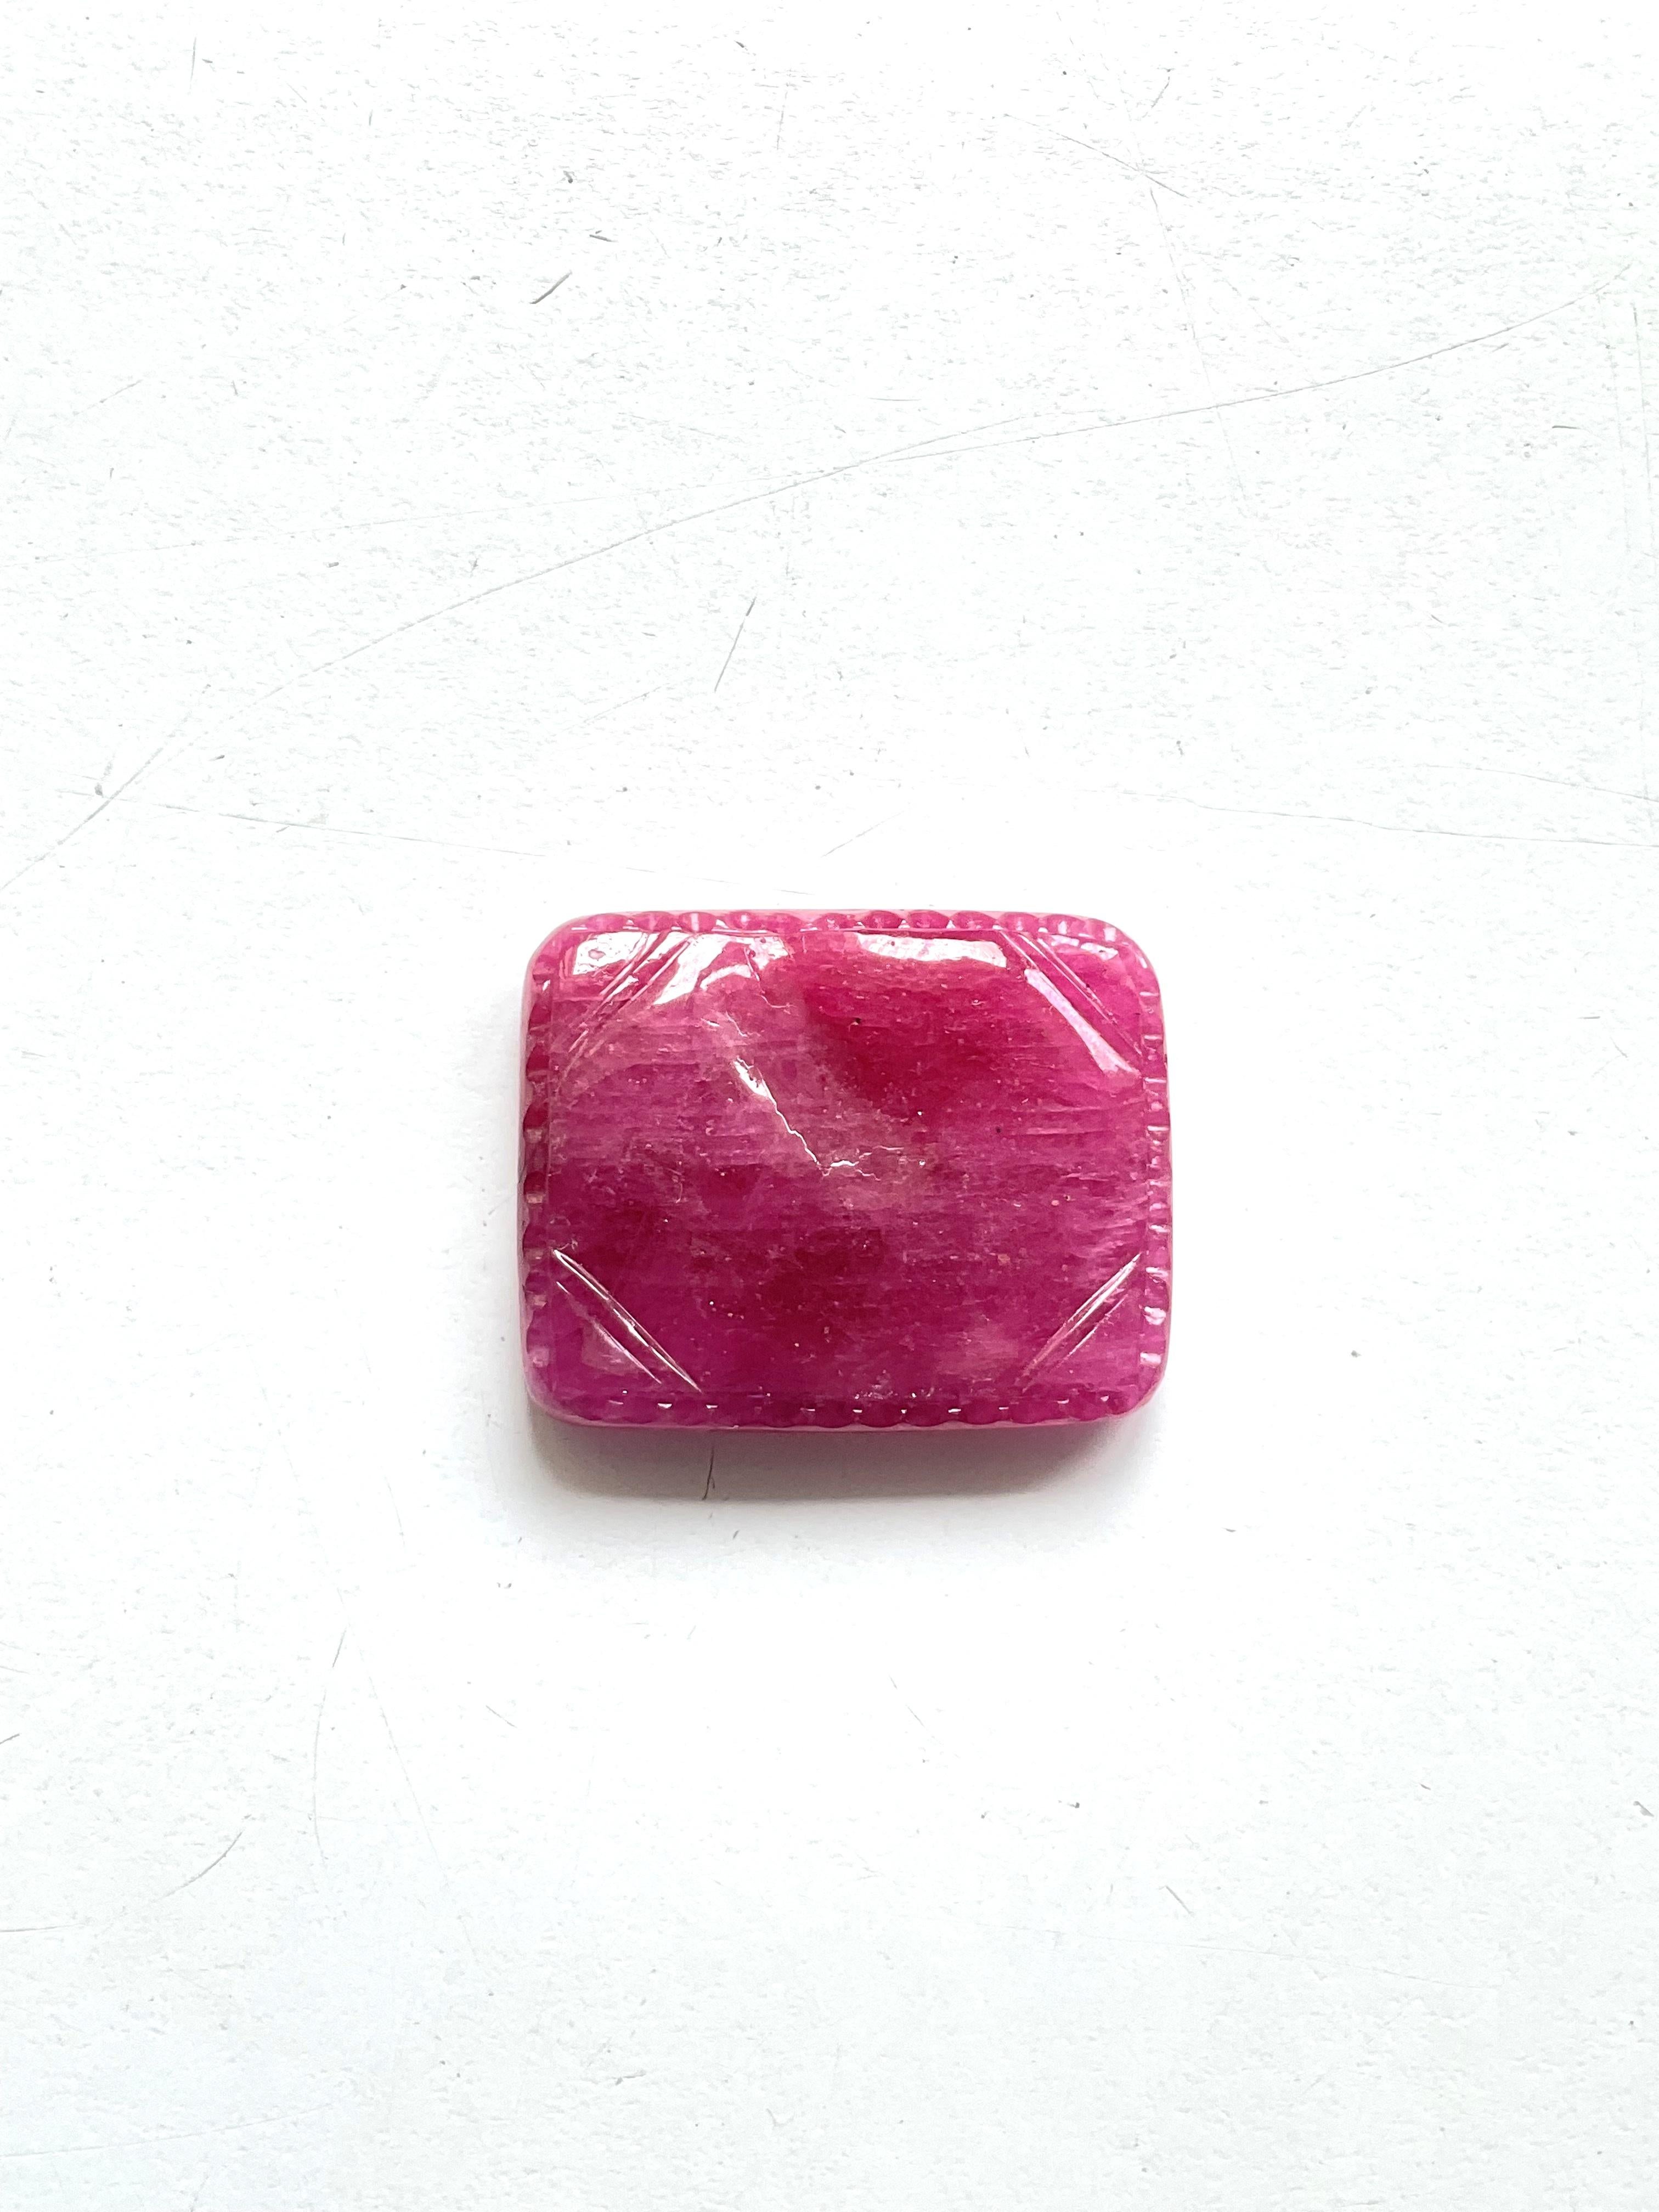 Women's or Men's Certified 89.35 Carats Ruby Mozambique Carved Specimen Heated Natural Gemstone For Sale